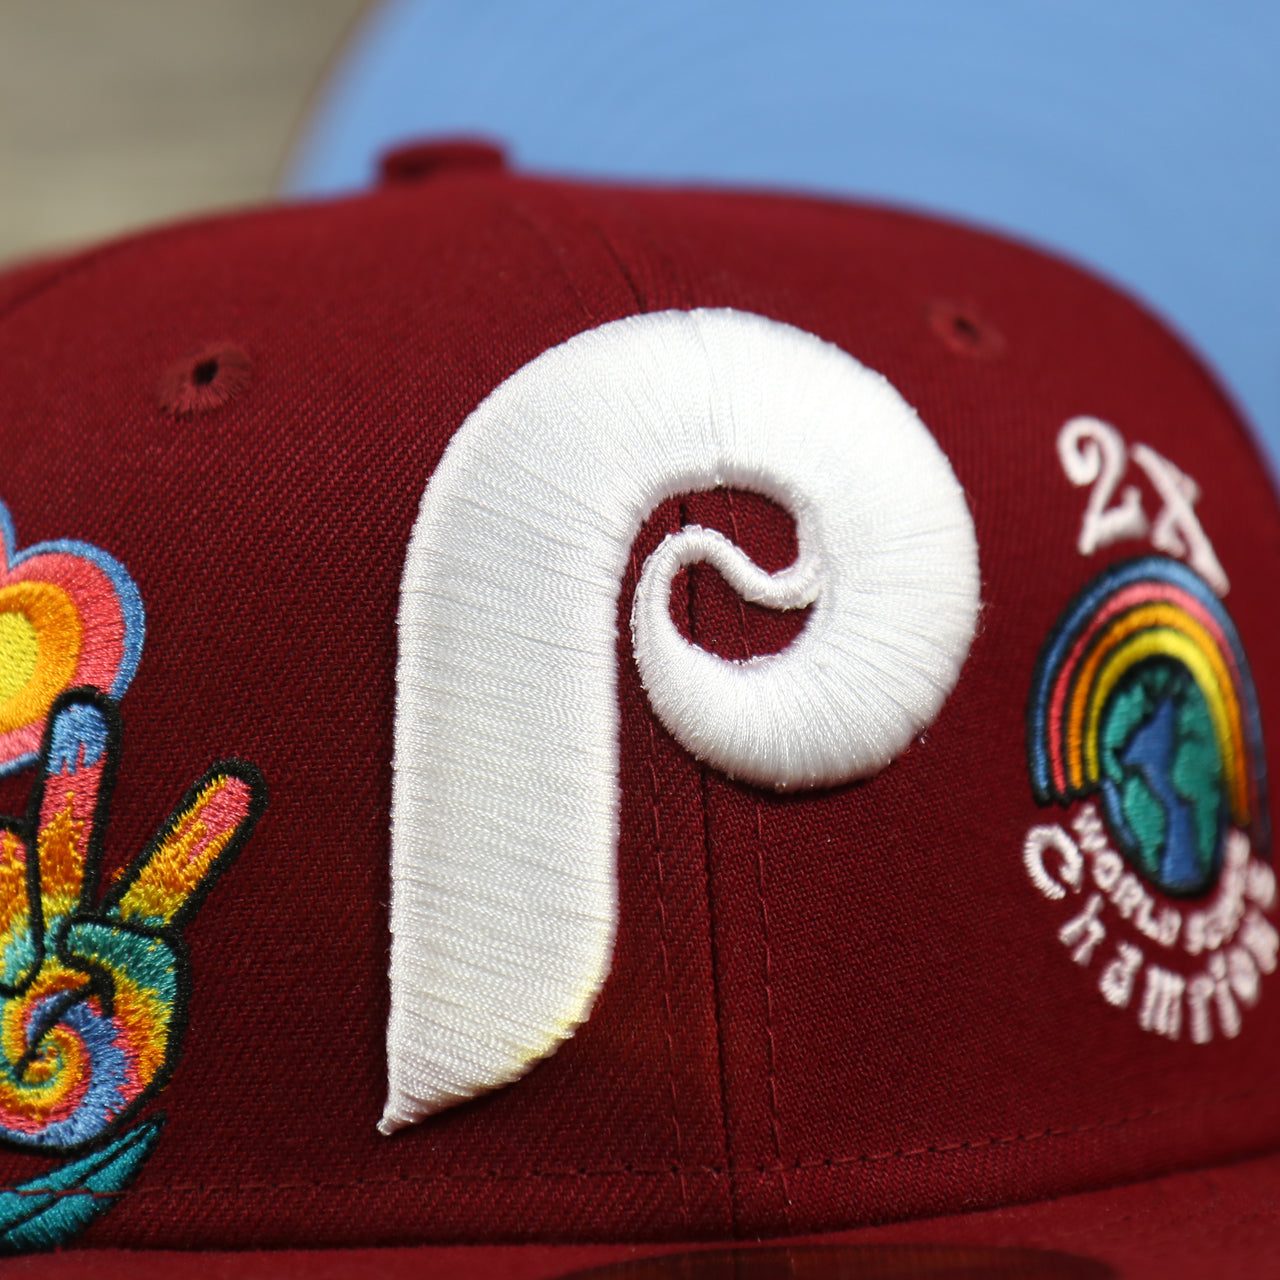 close up of the Phillies logo on the Philadelphia Phillies Cooperstown Groovy World Series Champions Patch 59Fifty Fitted Cap | New Era Groovy Side Patch 5950